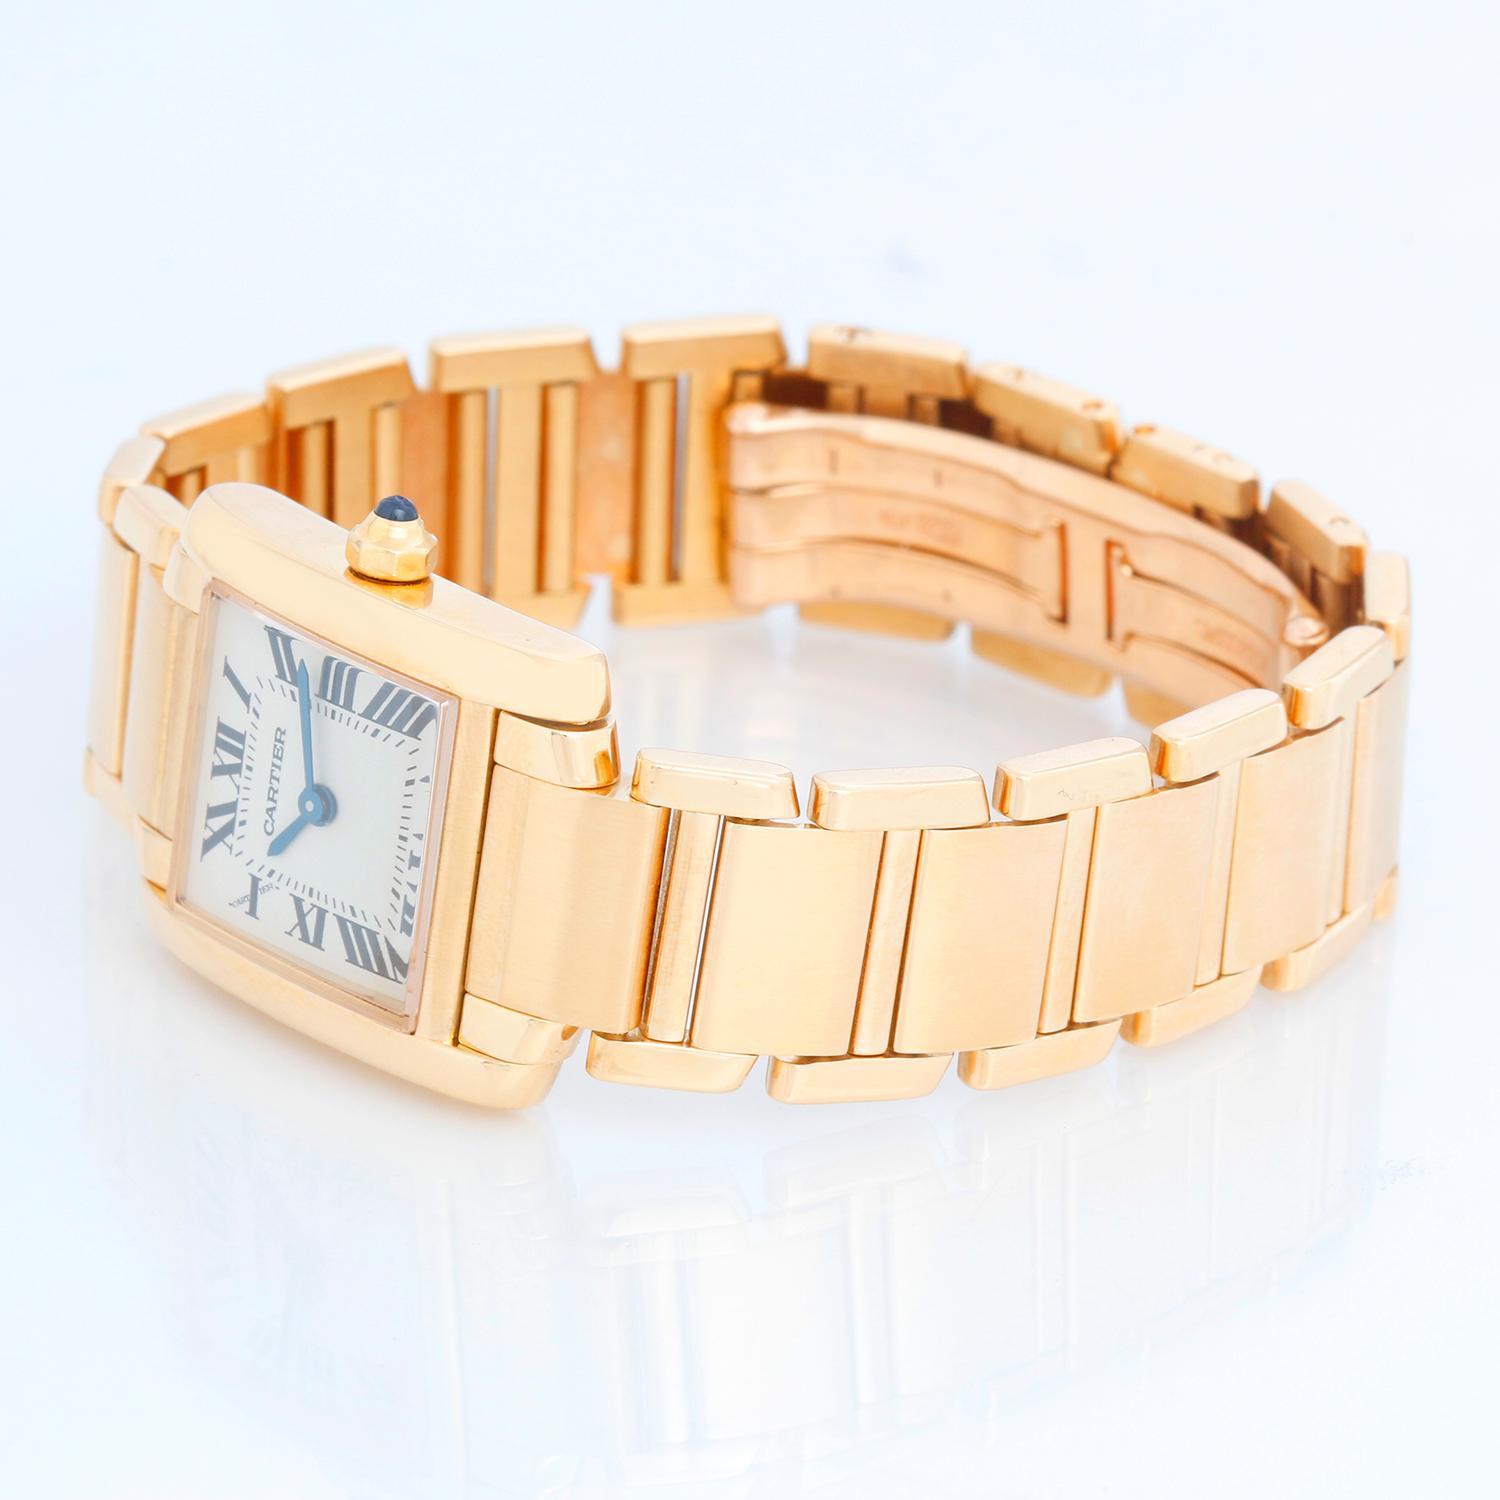 Cartier Tank Francaise 18k Yellow Gold Ladies Watch 2385 - Quartz. 18k yellow gold  case (20mm x 25mm). Ivory colored dial with black Roman numerals. 18k yellow gold Cartier Tank Francaise bracelet. Pre-owned with custom box.